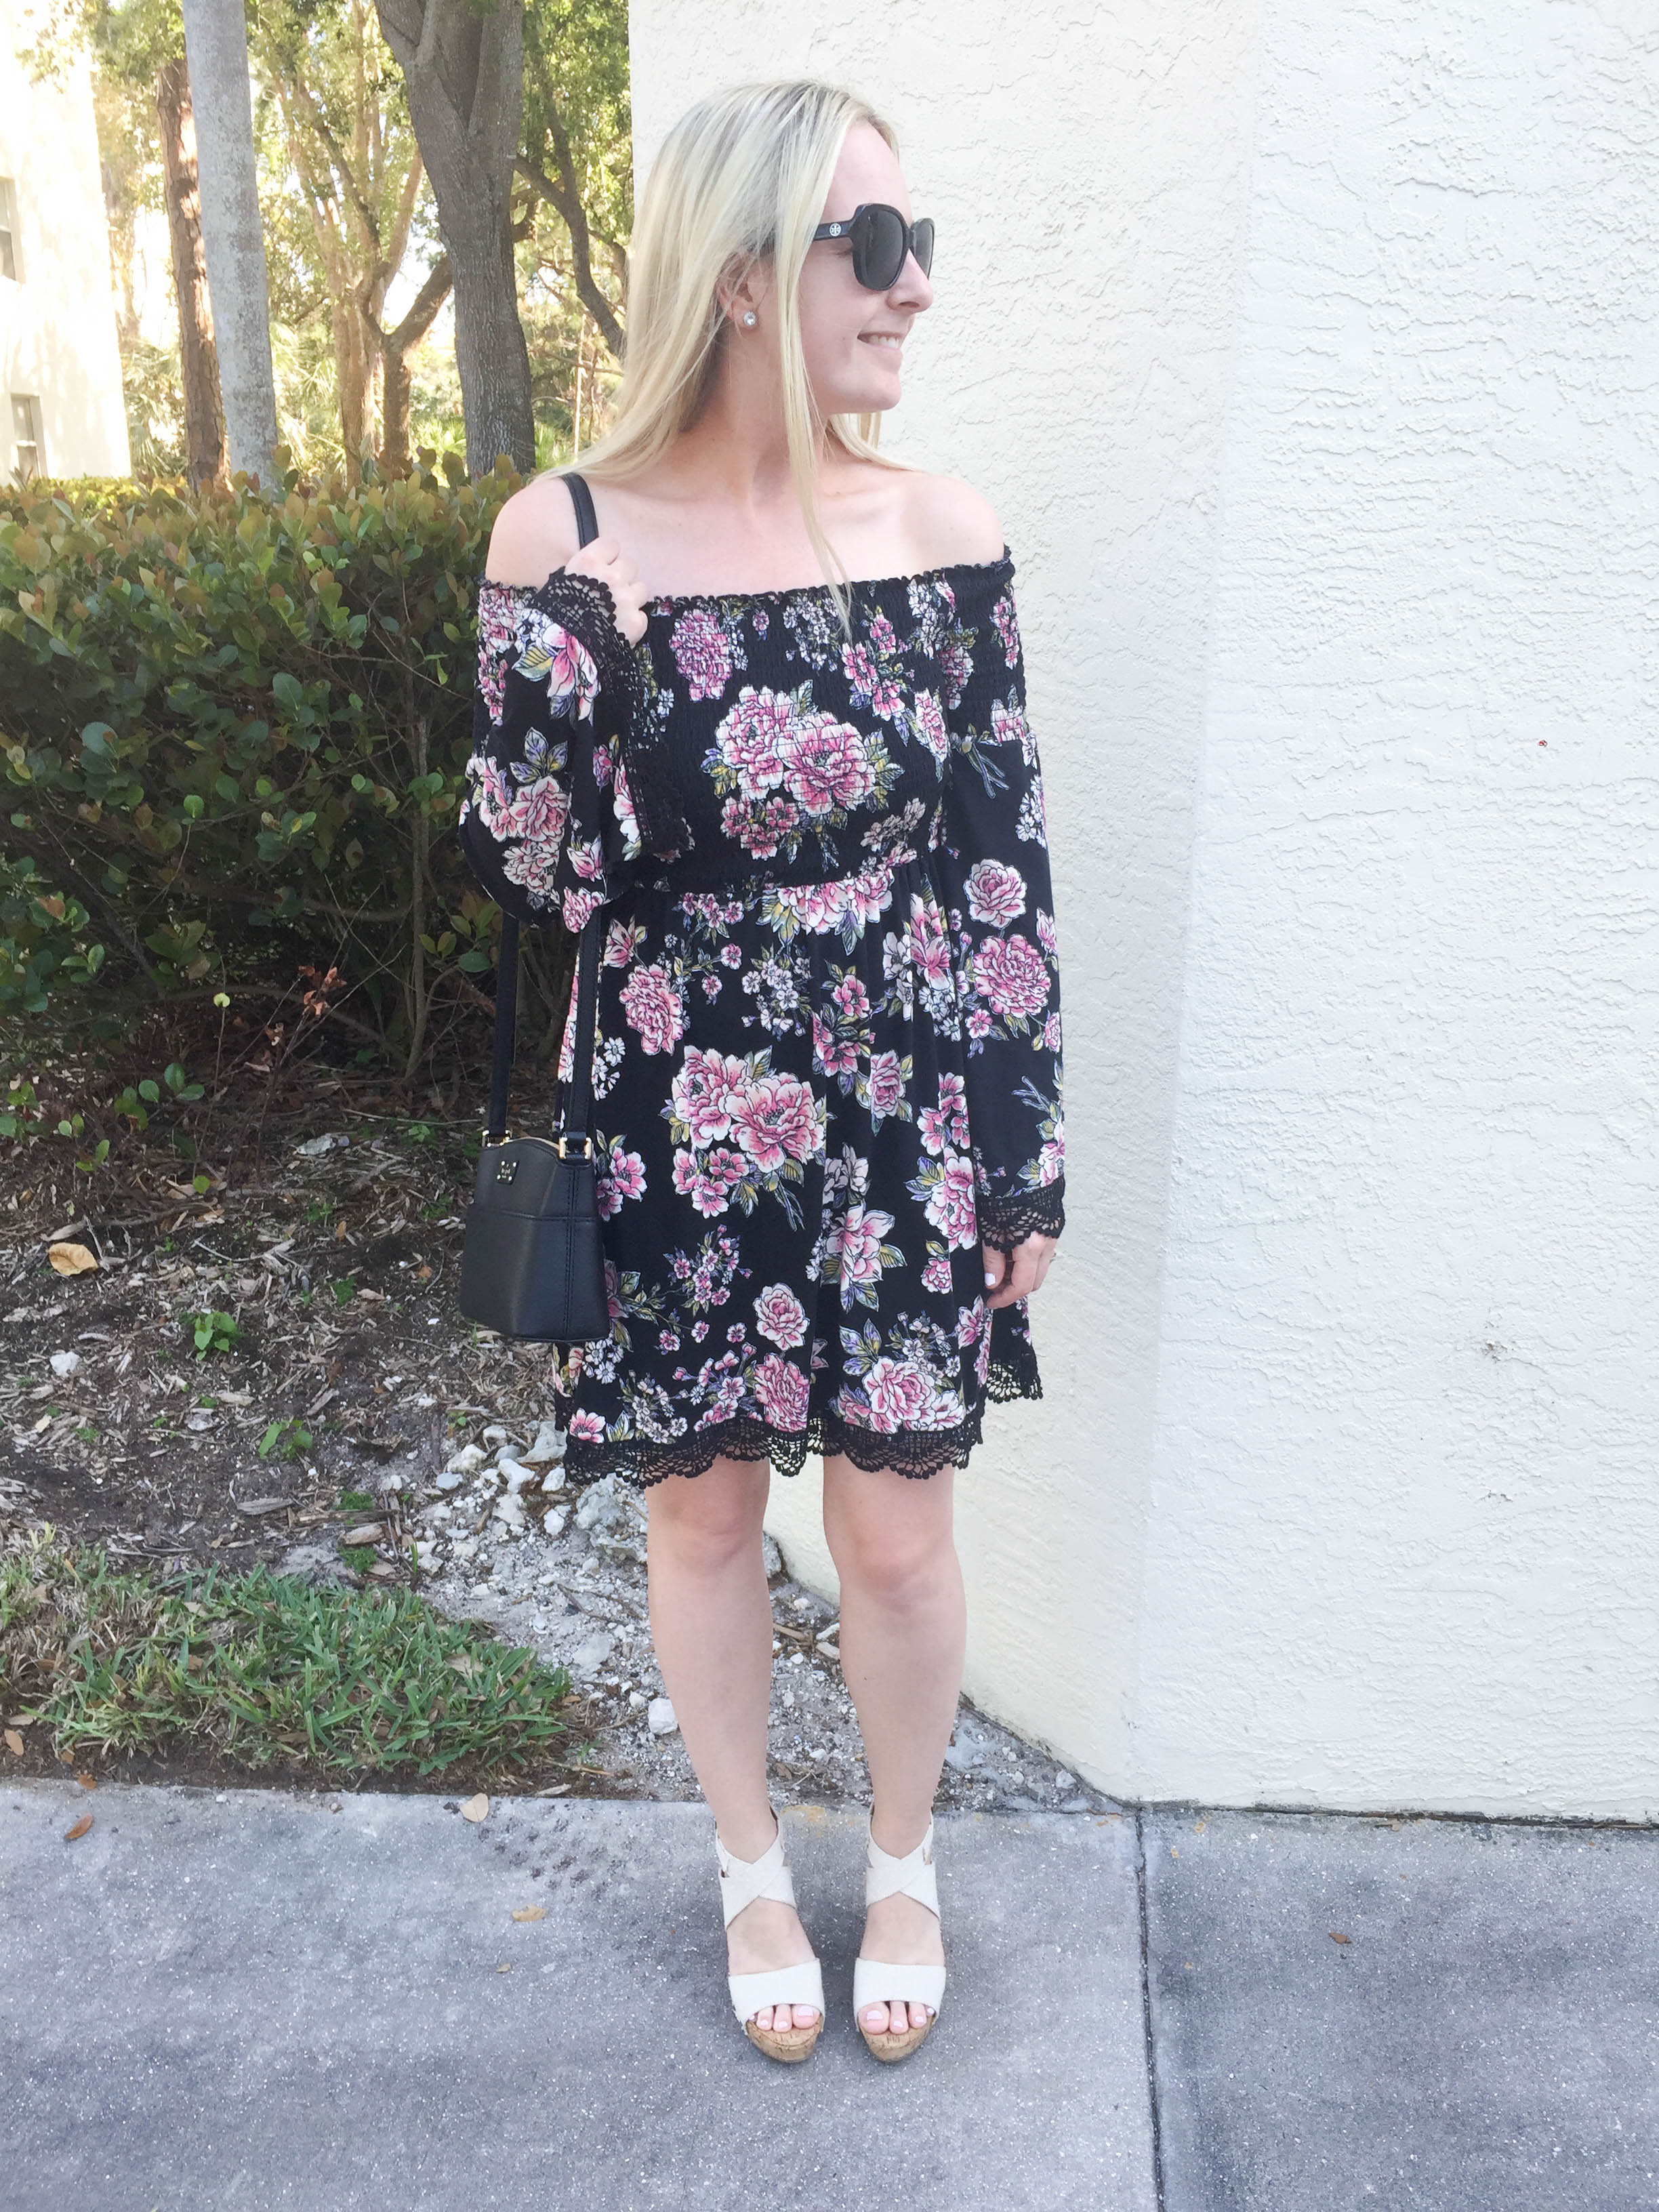 Target Lace and Floral Dress